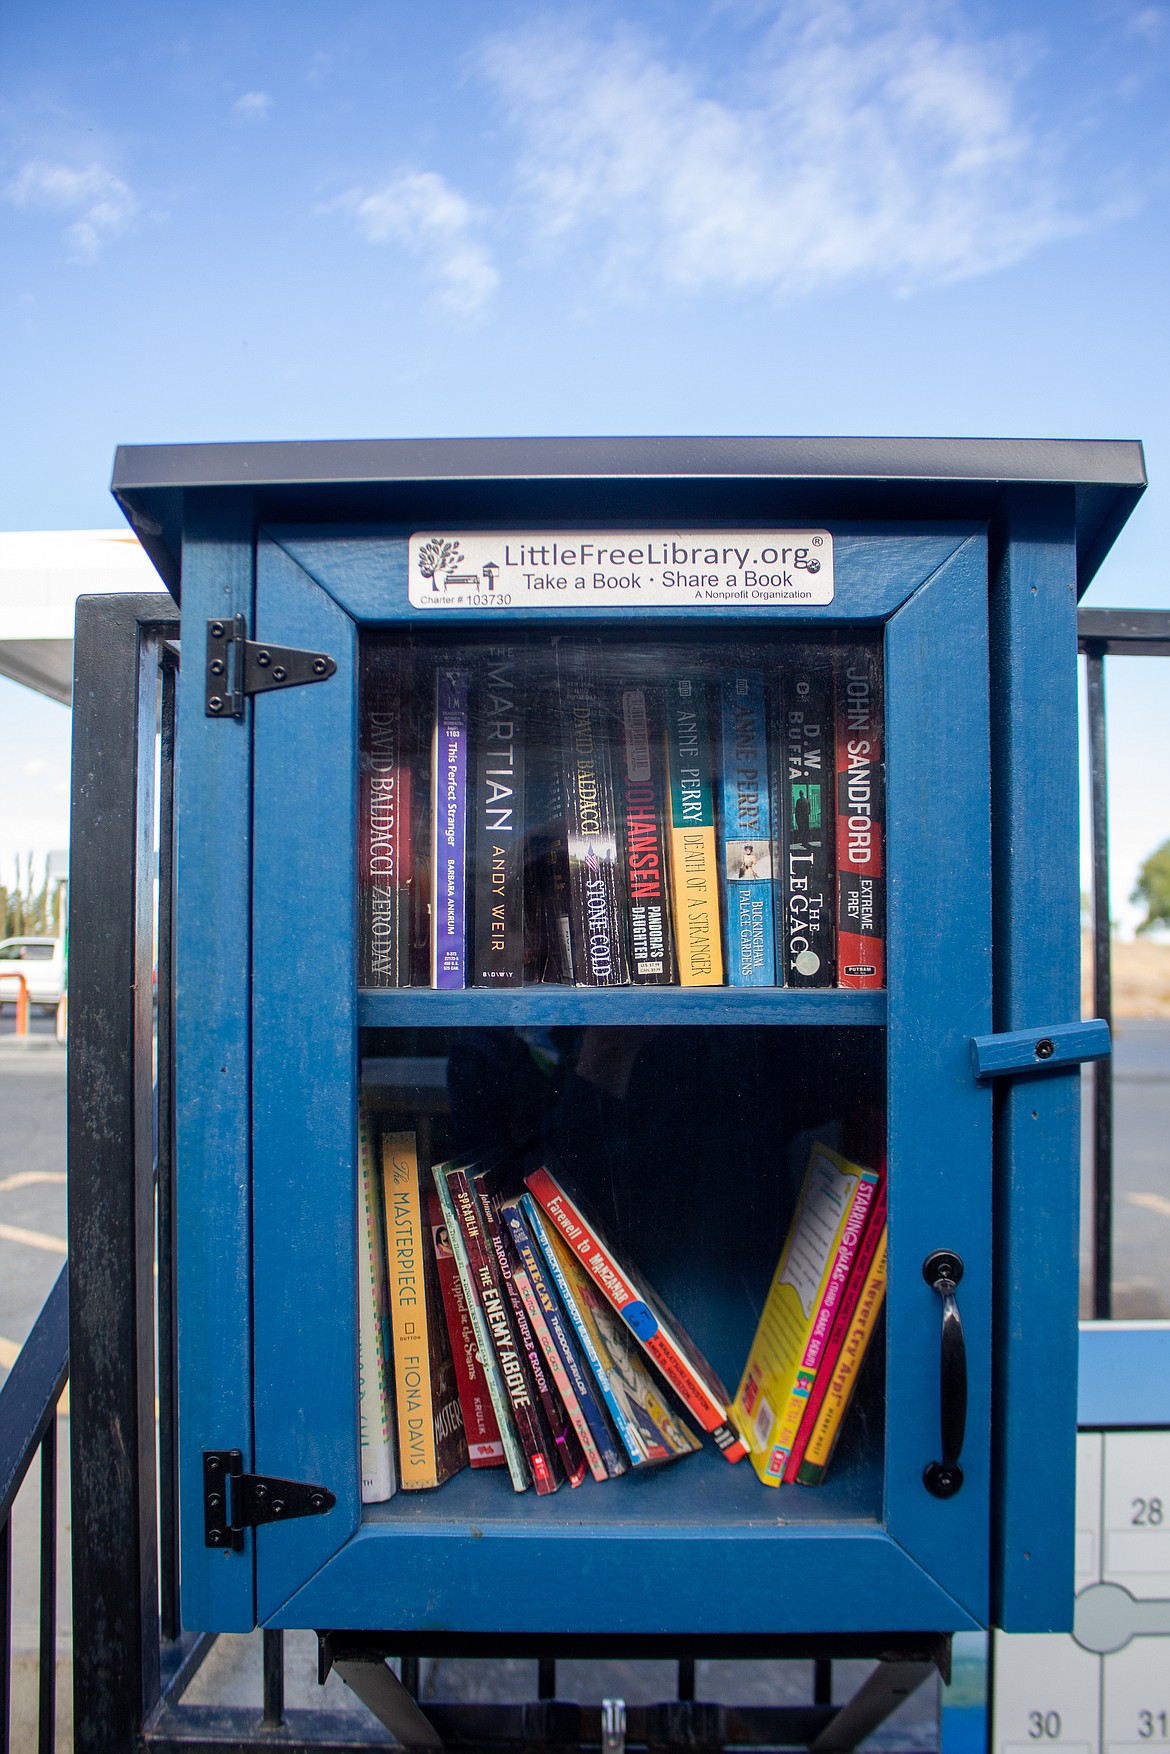 Books line the shelves of the Little Free Library located near Potholes General Store.